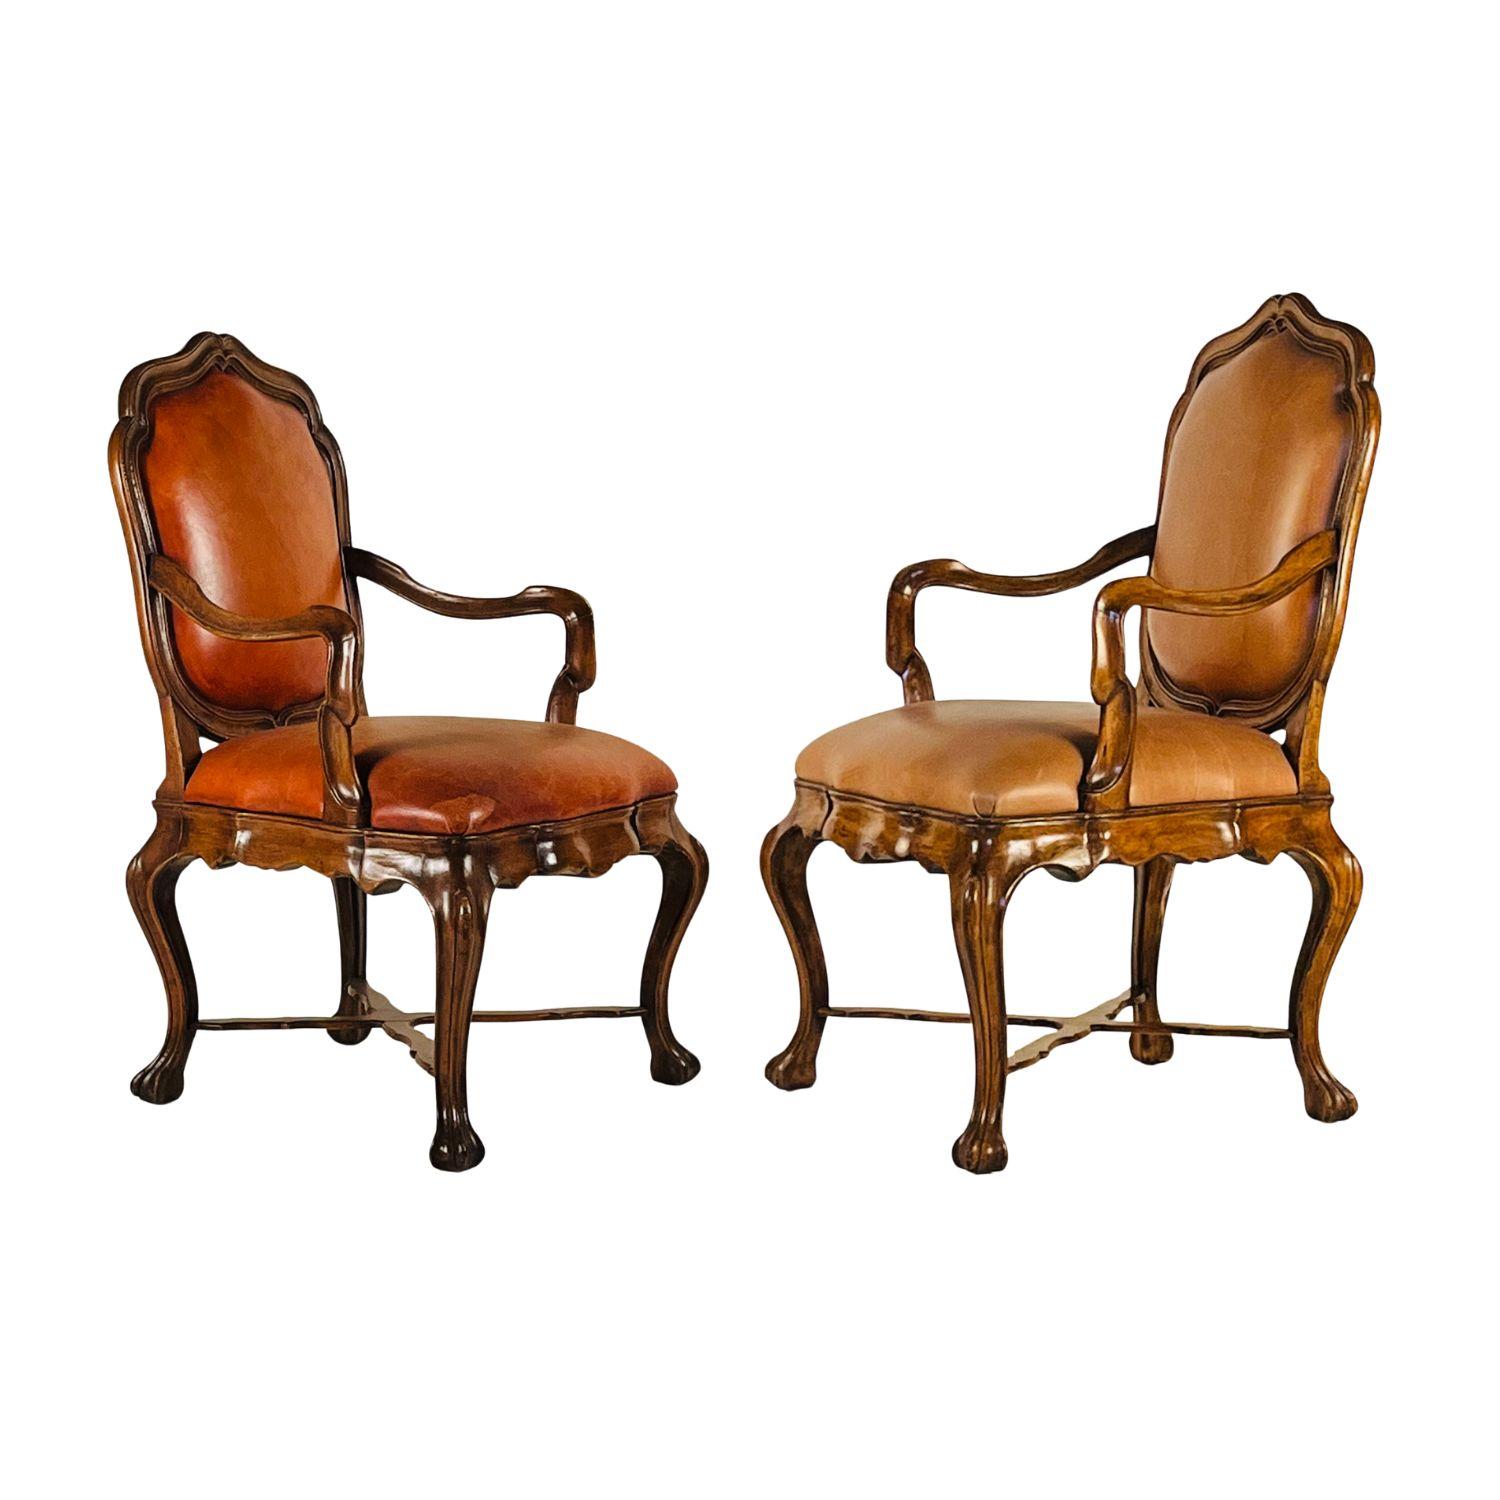 This pair of elegant walnut armchairs by Therien Studio Workshops stands out for the impressive proportions and fine craftsmanship. The carving on the woodwork and fine leather upholstery add a touch of luxury. These chairs will be a perfect